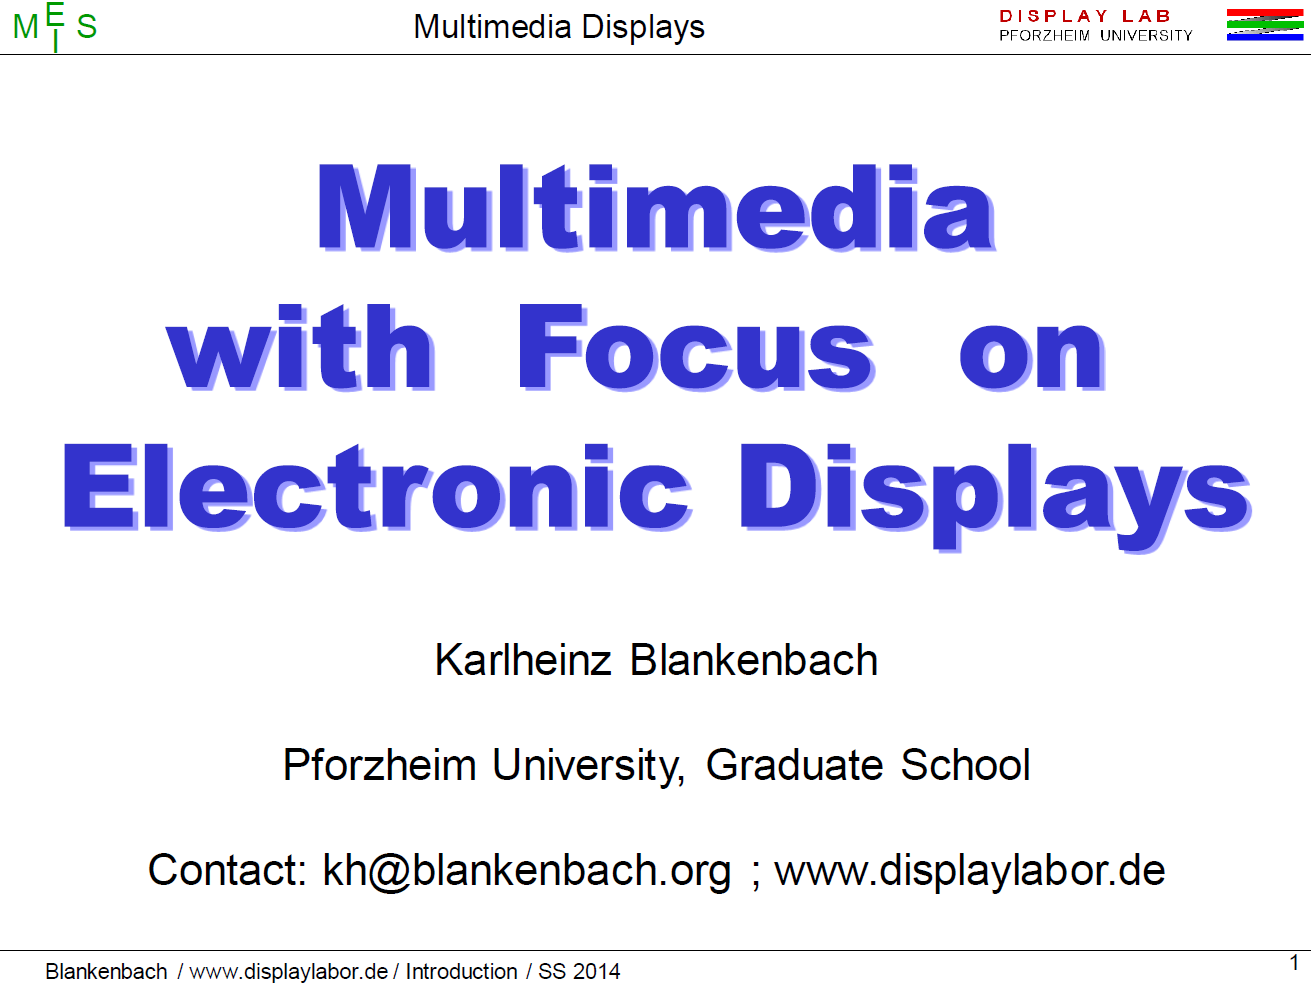 Blankenbach Multimedia with Focus on Electronic Displays